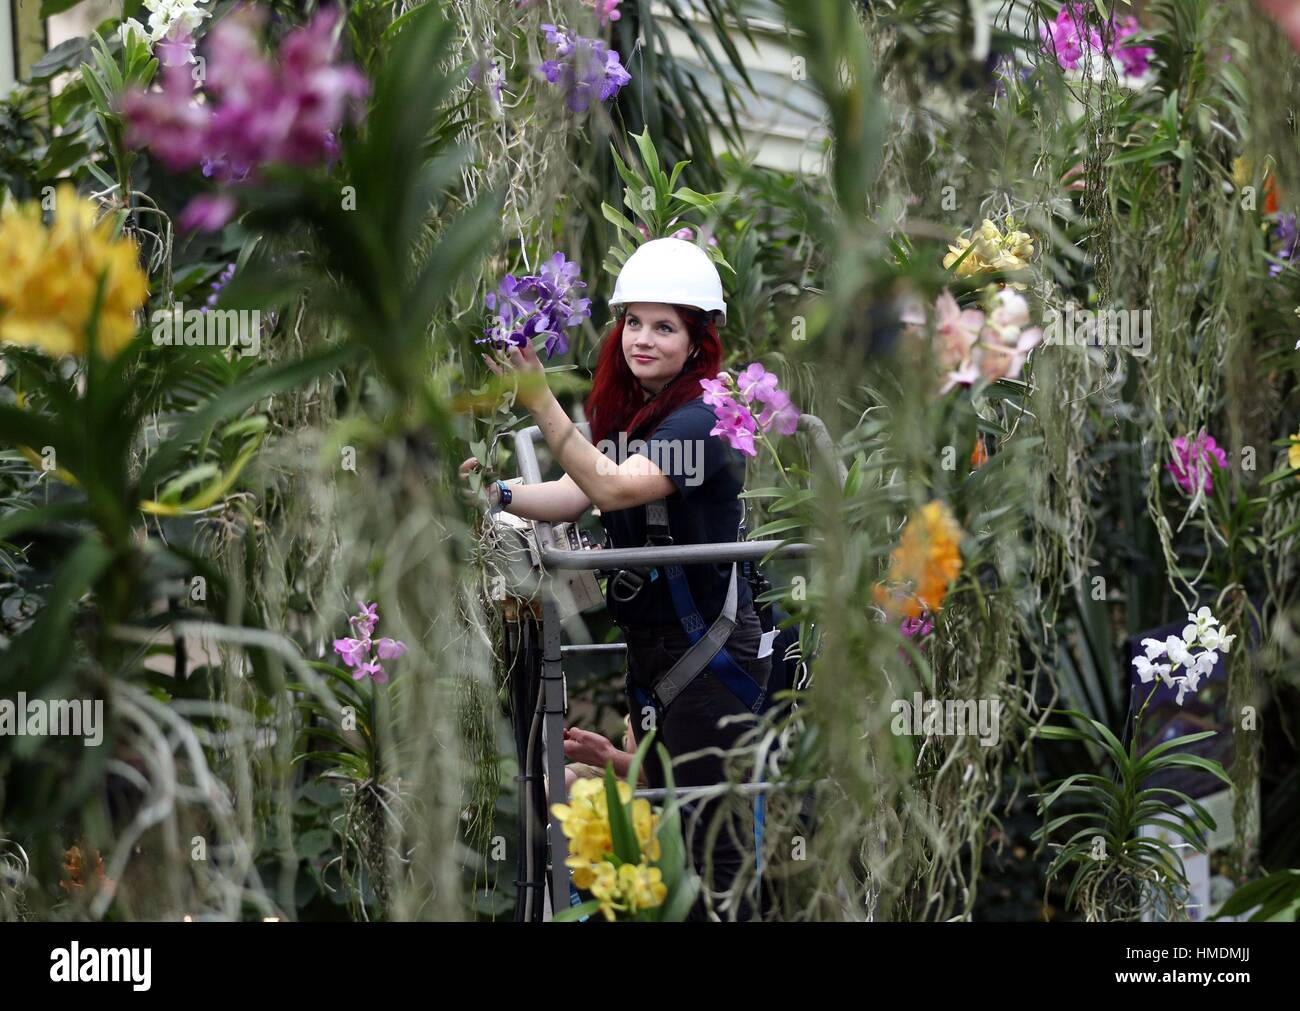 Festival creator Elisa Biondi uses a hoist to put the finishing touches to exhibits at the Kew Orchid festival in the Prince of Wales Conservatory at Kew Gardens in west London. Stock Photo